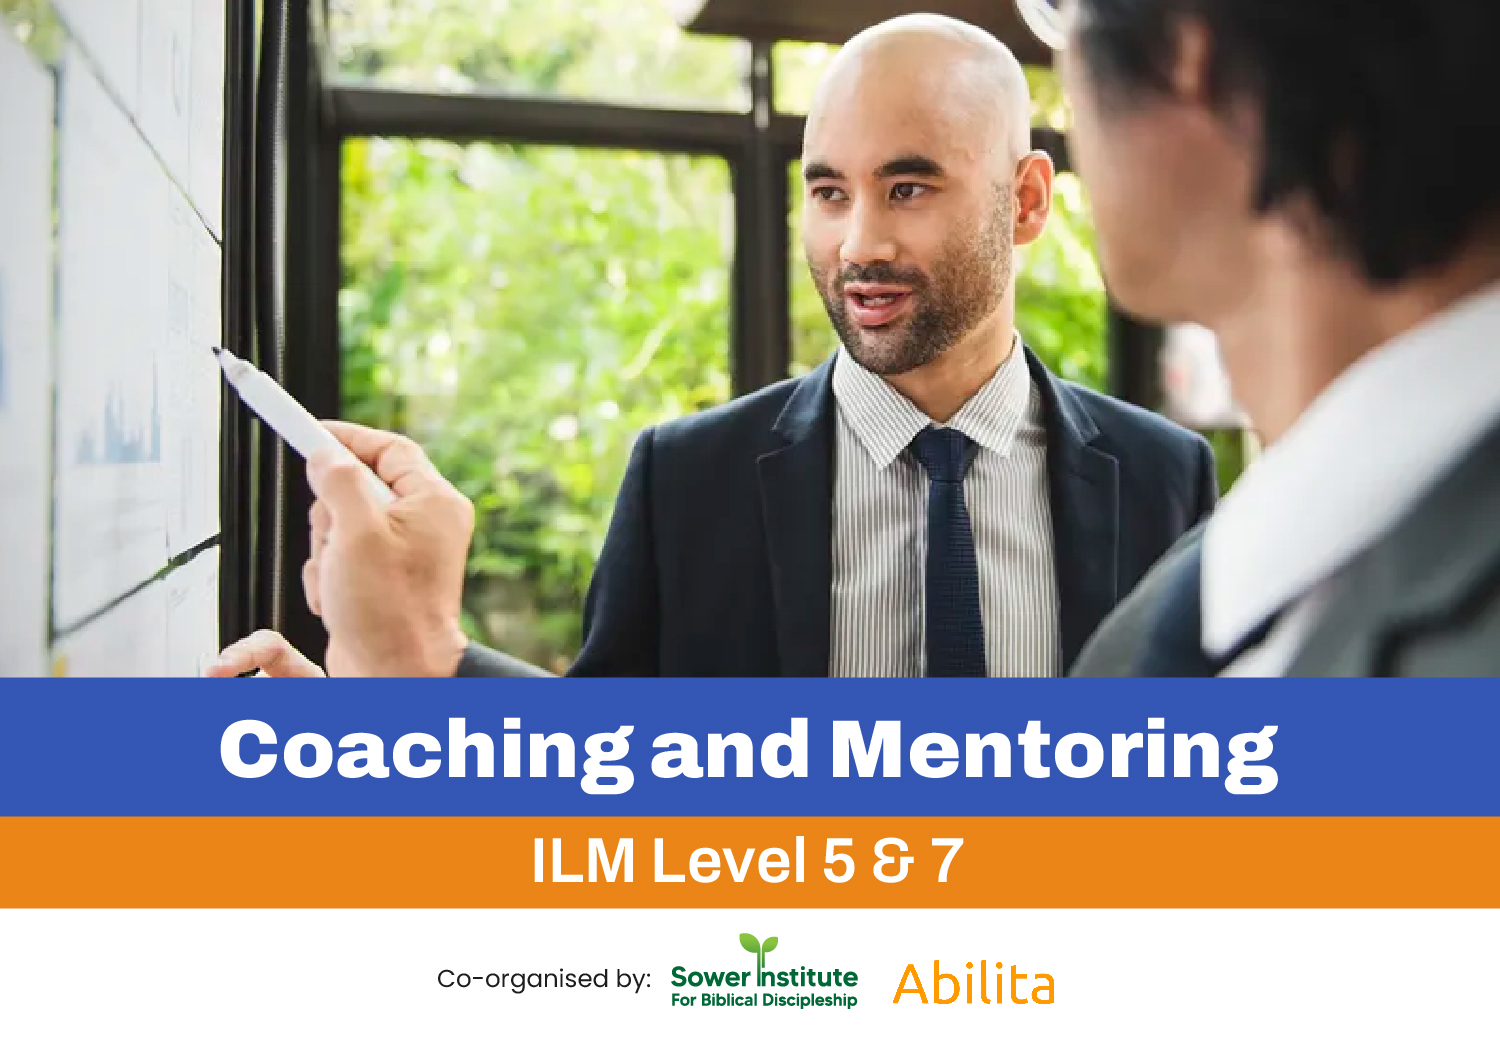 <strong>Coaching and Mentoring - ILM Level 5 & 7</strong>